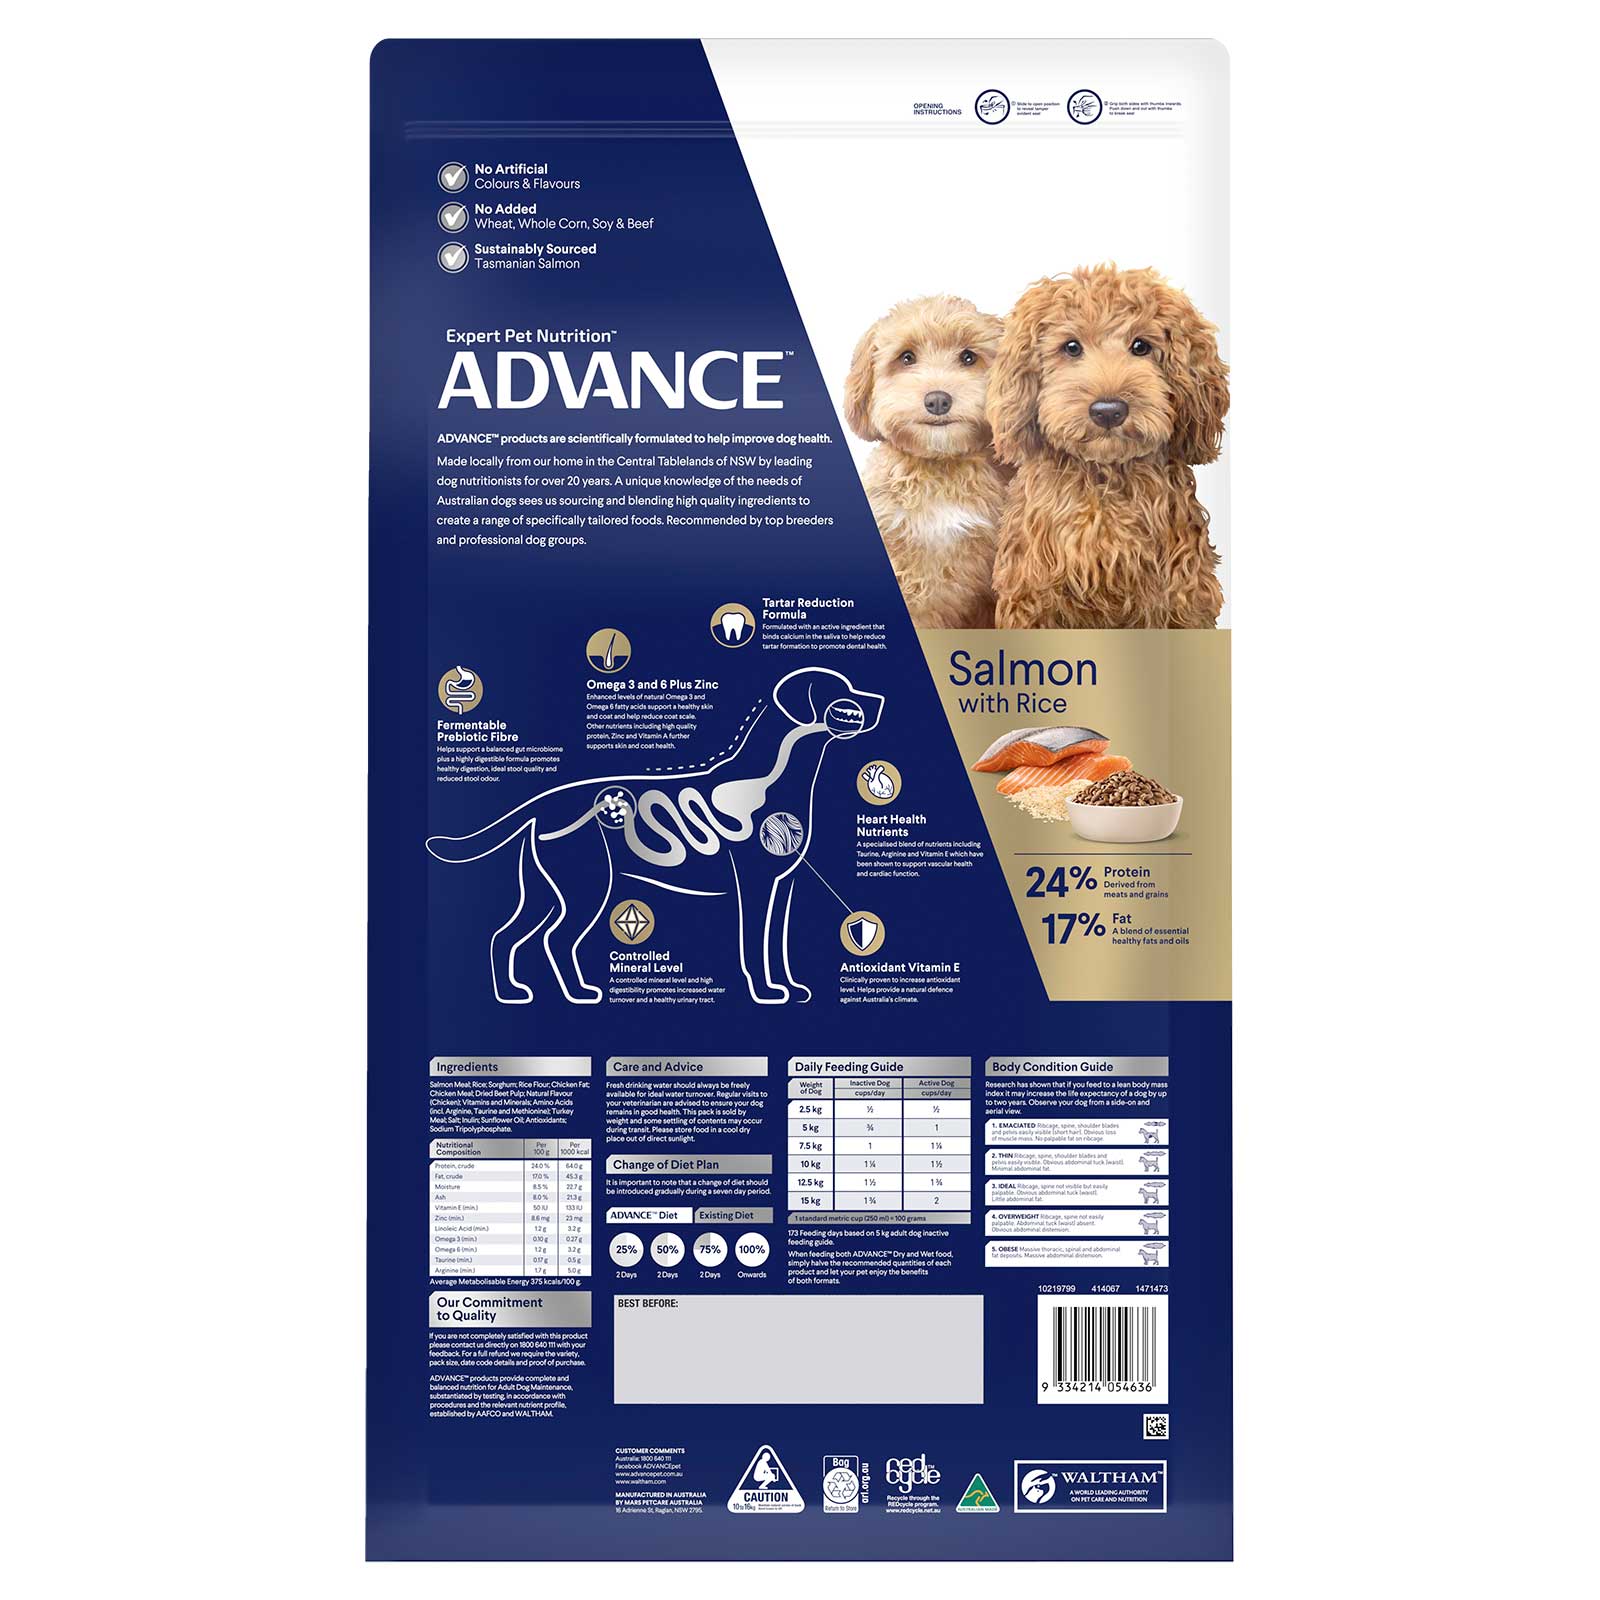 Advance Dog Food Adult Small Oodle Breed Salmon with Rice